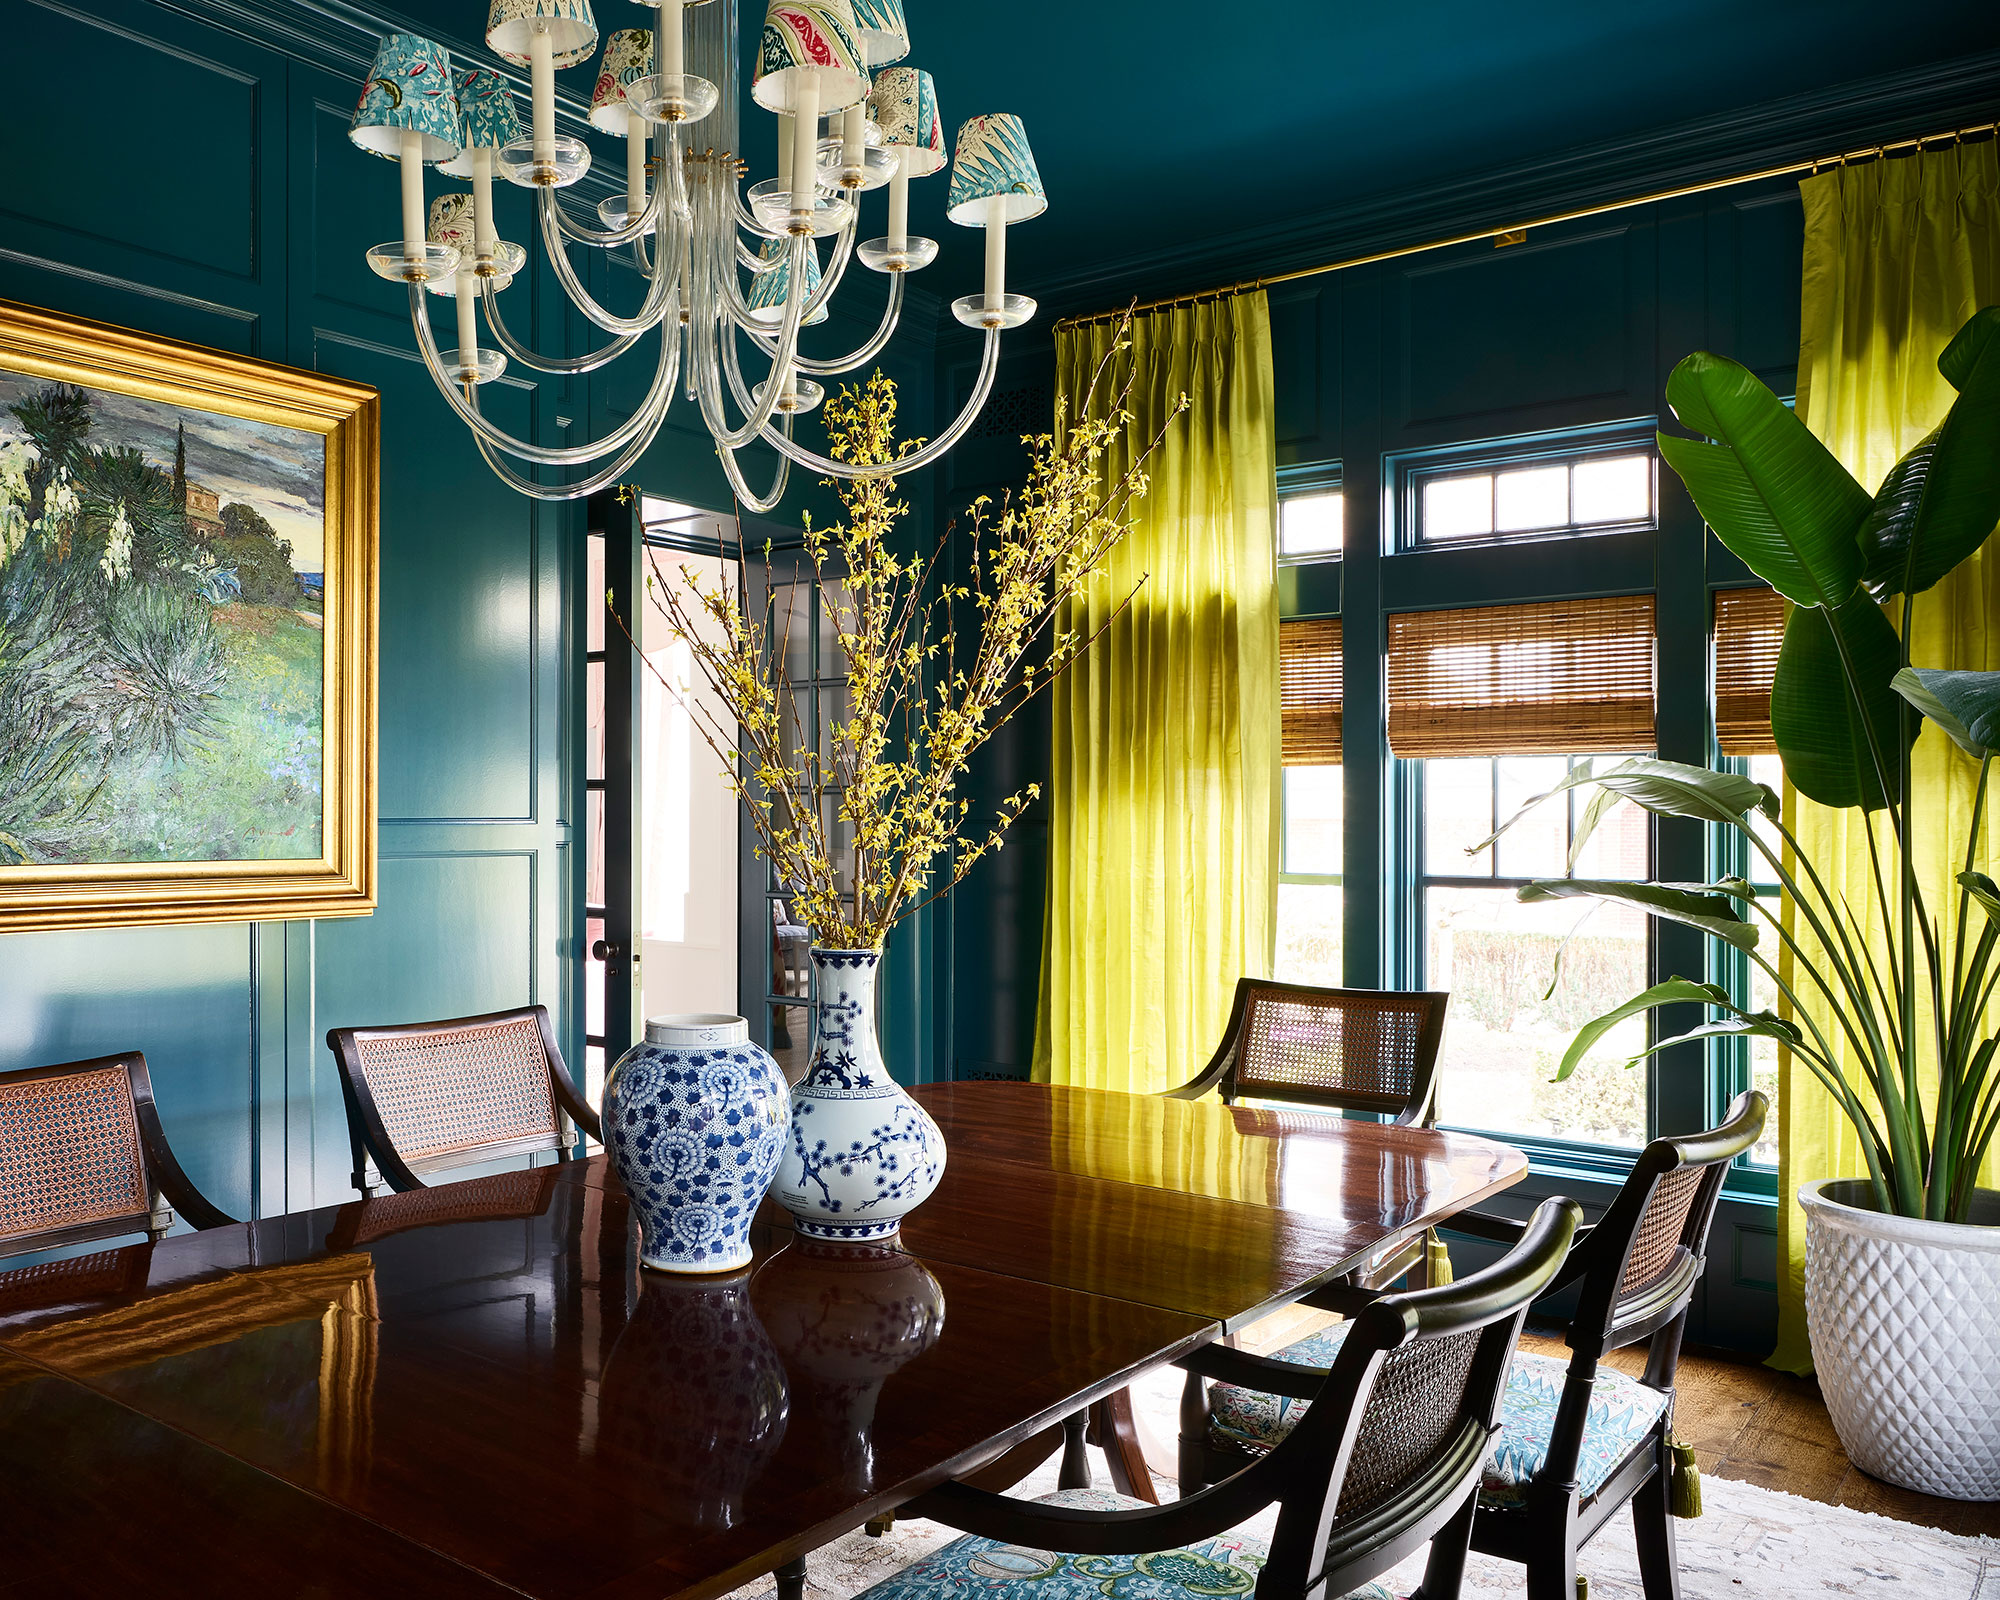 A teal dining room with chartreuse drapes and a a colorful chandelier over a long wood table.